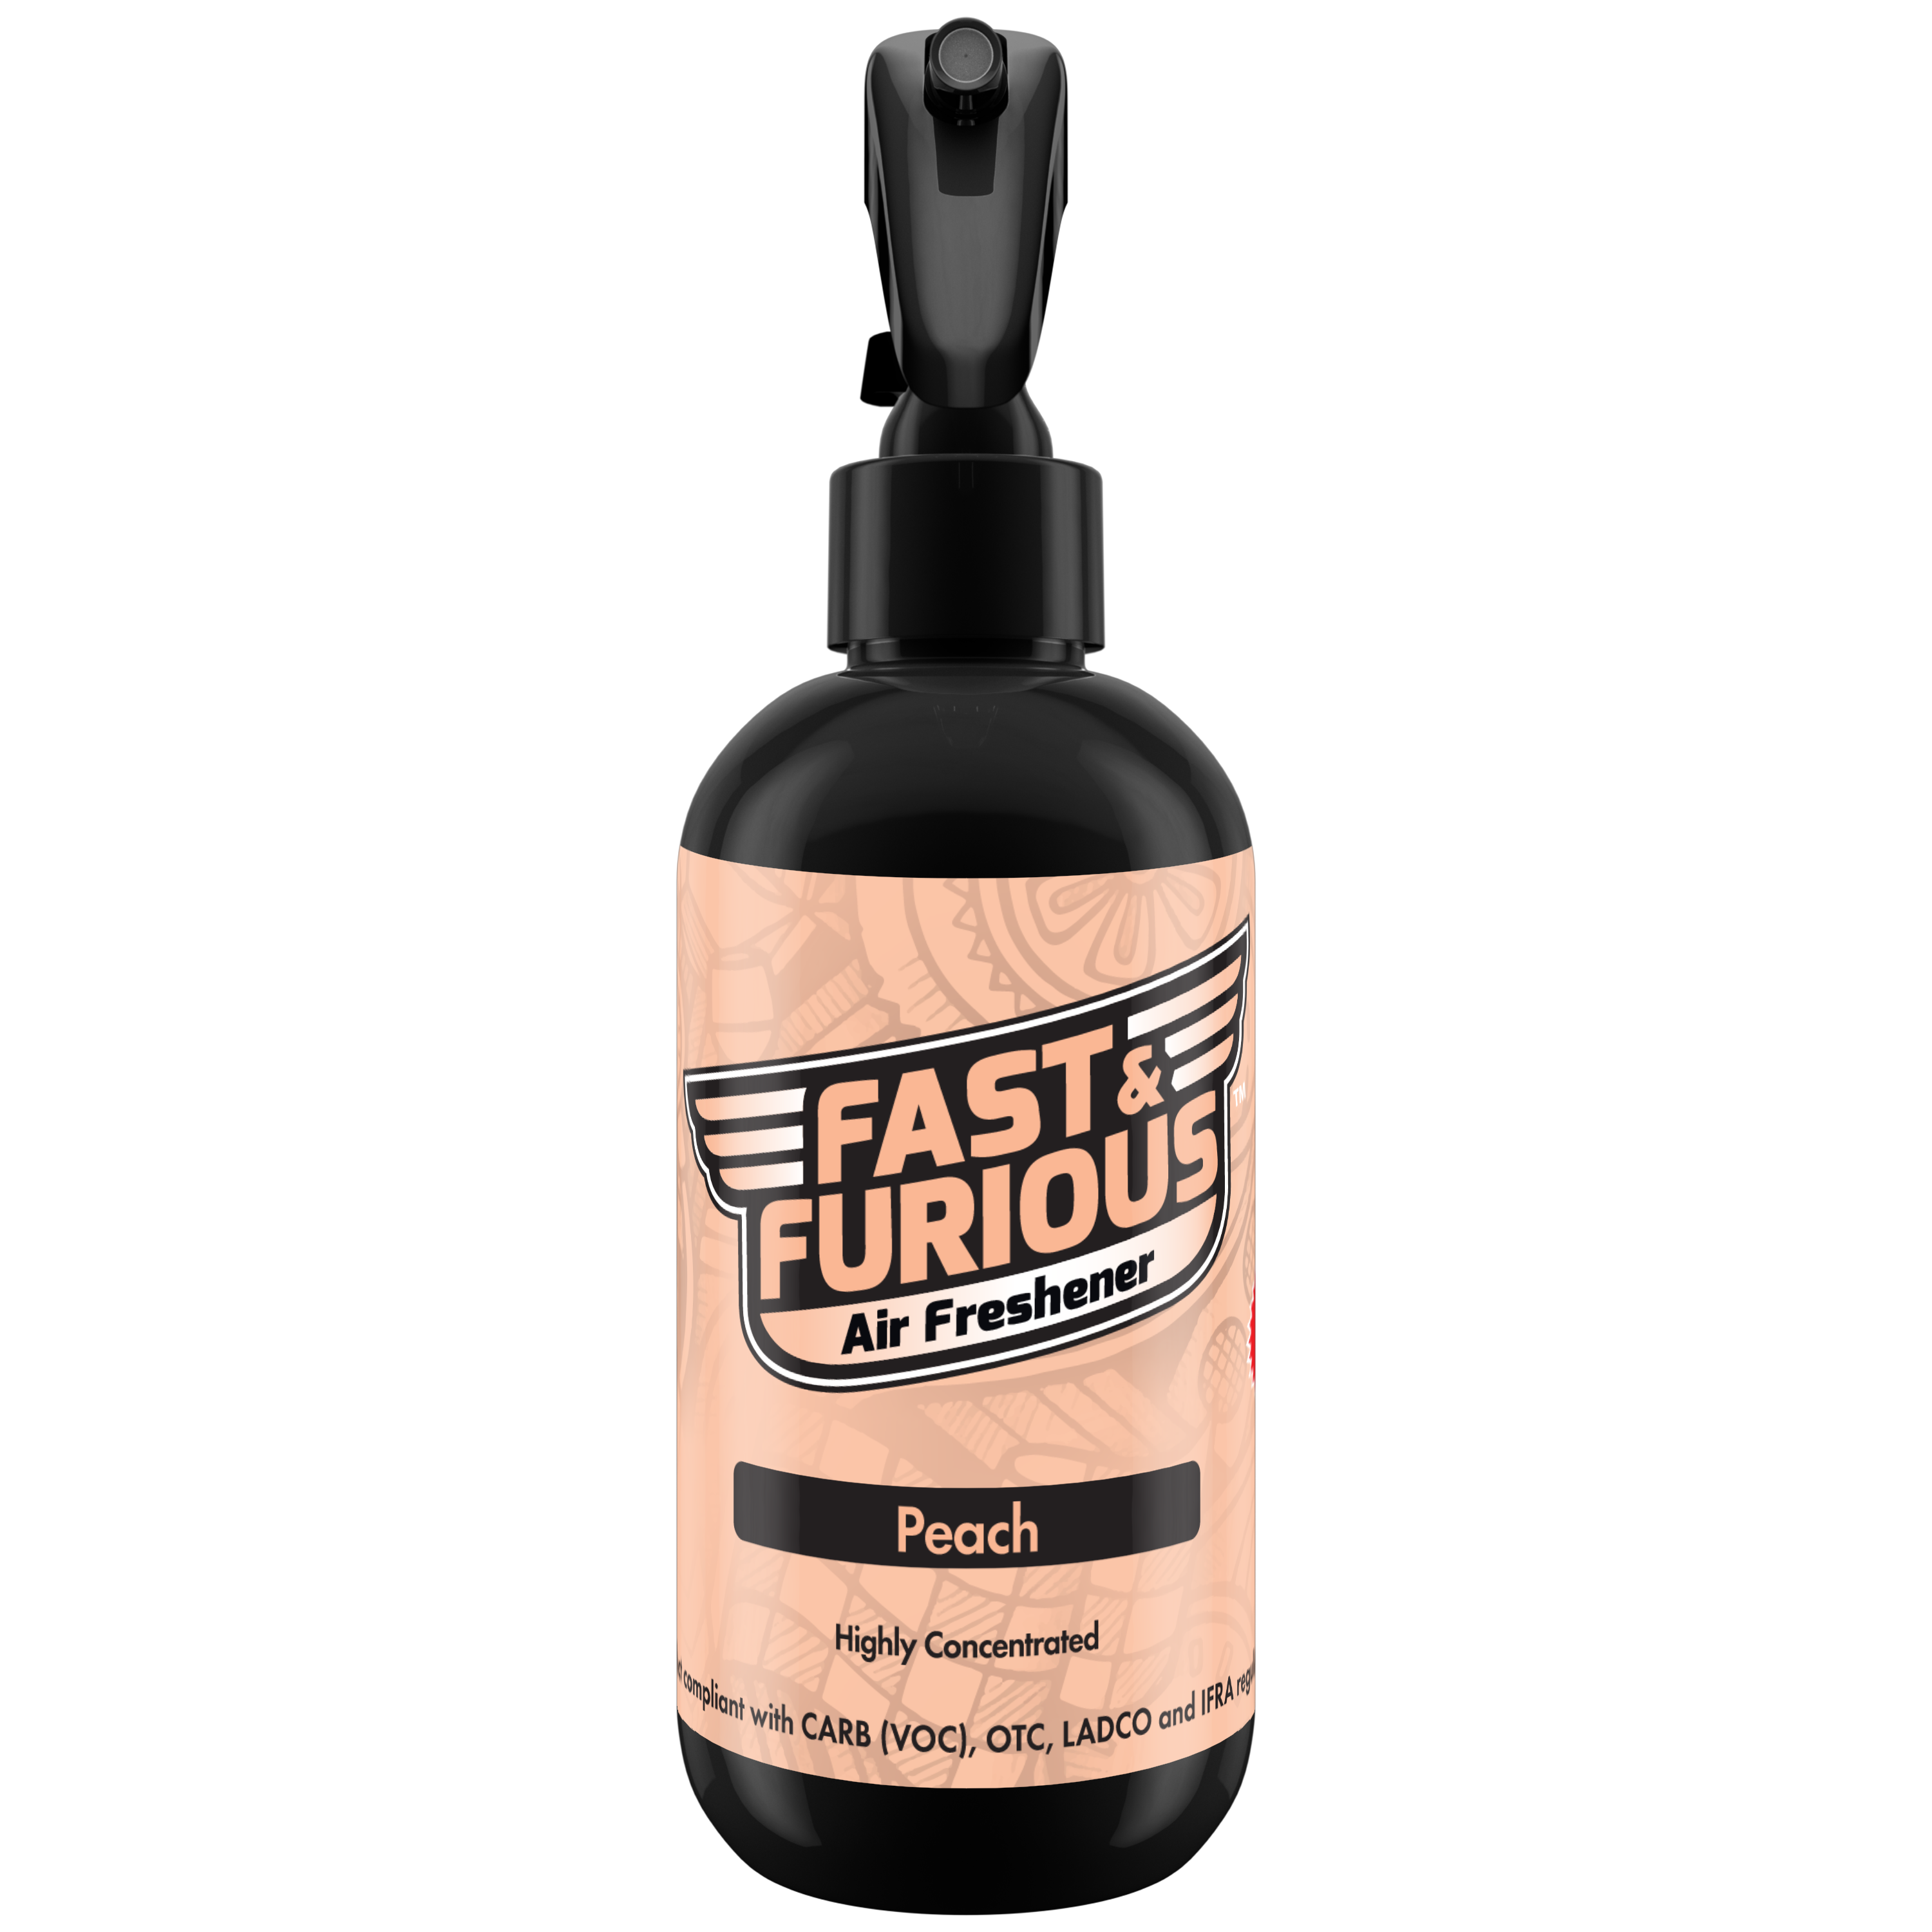 Fast and Furious Air Freshener - Peach Scent